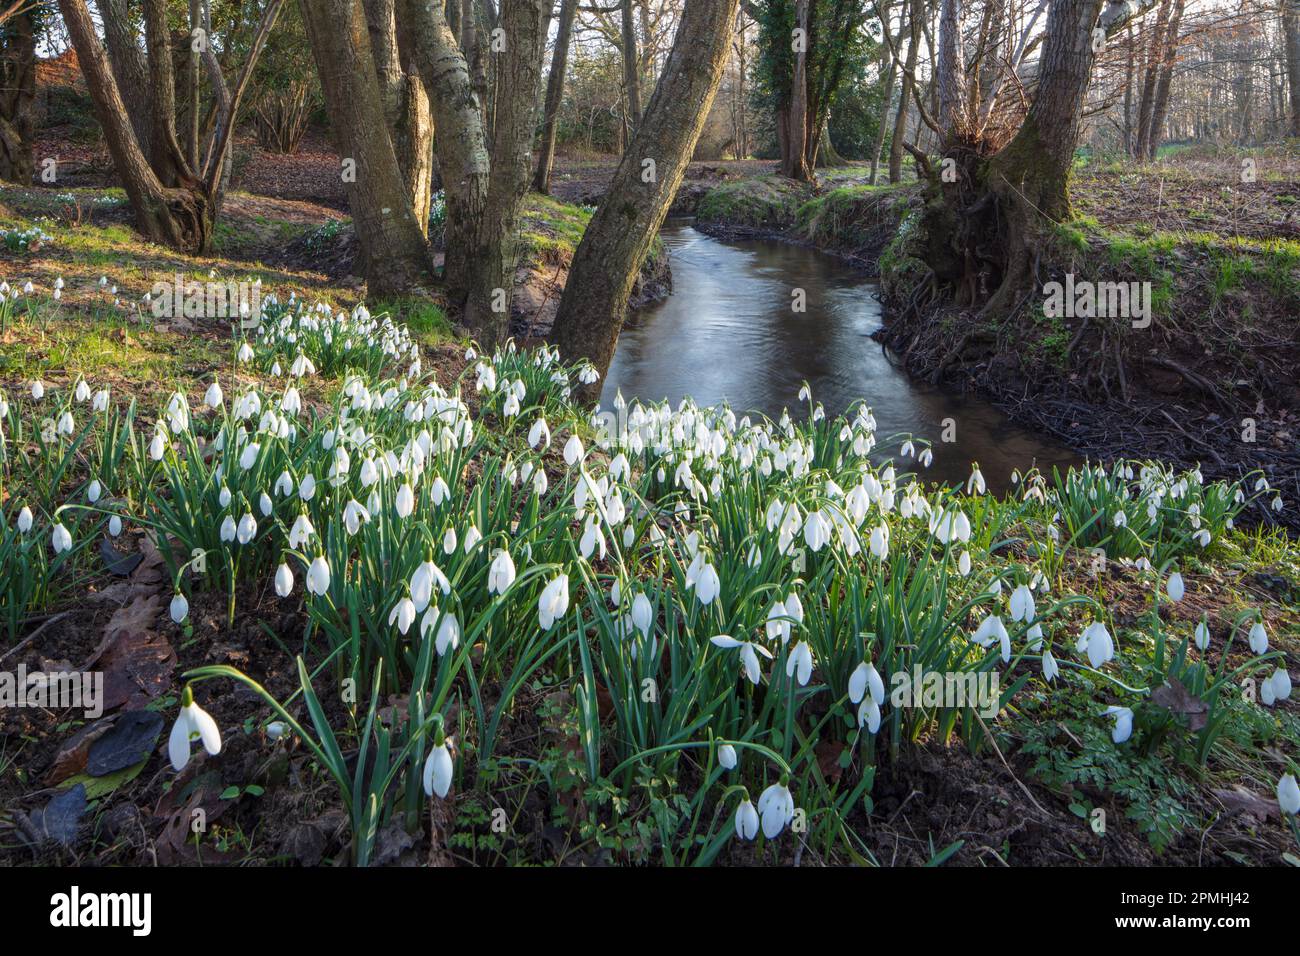 Snowdrops (Galanthus) growing beside stream in woodland in late afternoon sunlight, Burghclere, Hampshire, England, United Kingdom, Europe Stock Photo